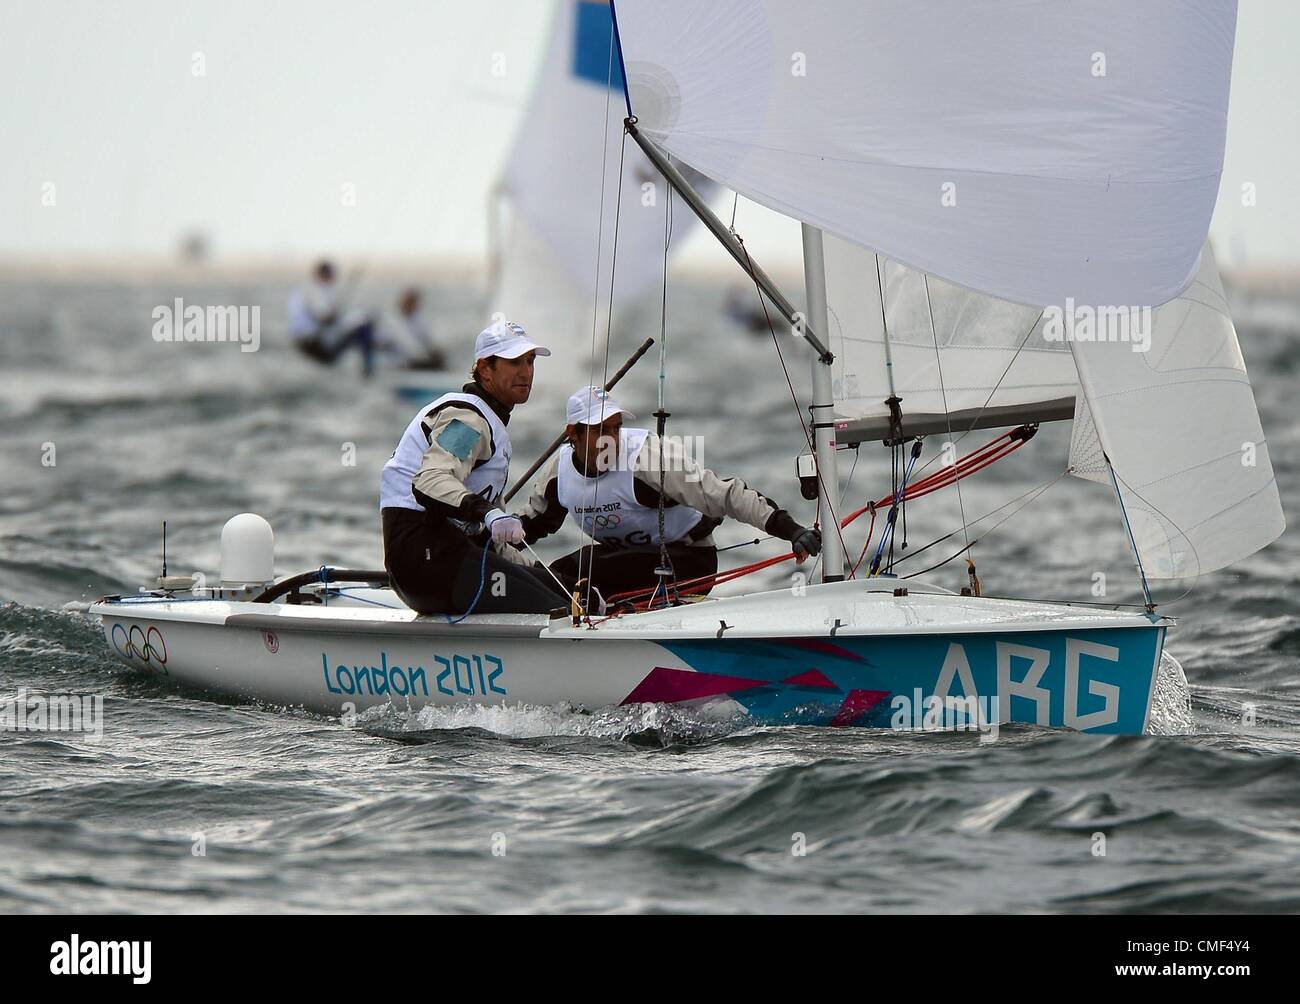 1st Aug 2012. London 2012 Olympics: Sailing, action during the London 2012 Olympic Games at the Weymouth & Portland Venue, Dorset, Britain, UK.  Lucas Calabrese and Juan de la Fuente of Argentina in the Men's 470 class August 01st, 2012 PICTURE BY: DORSET MEDIA SERVICE Stock Photo